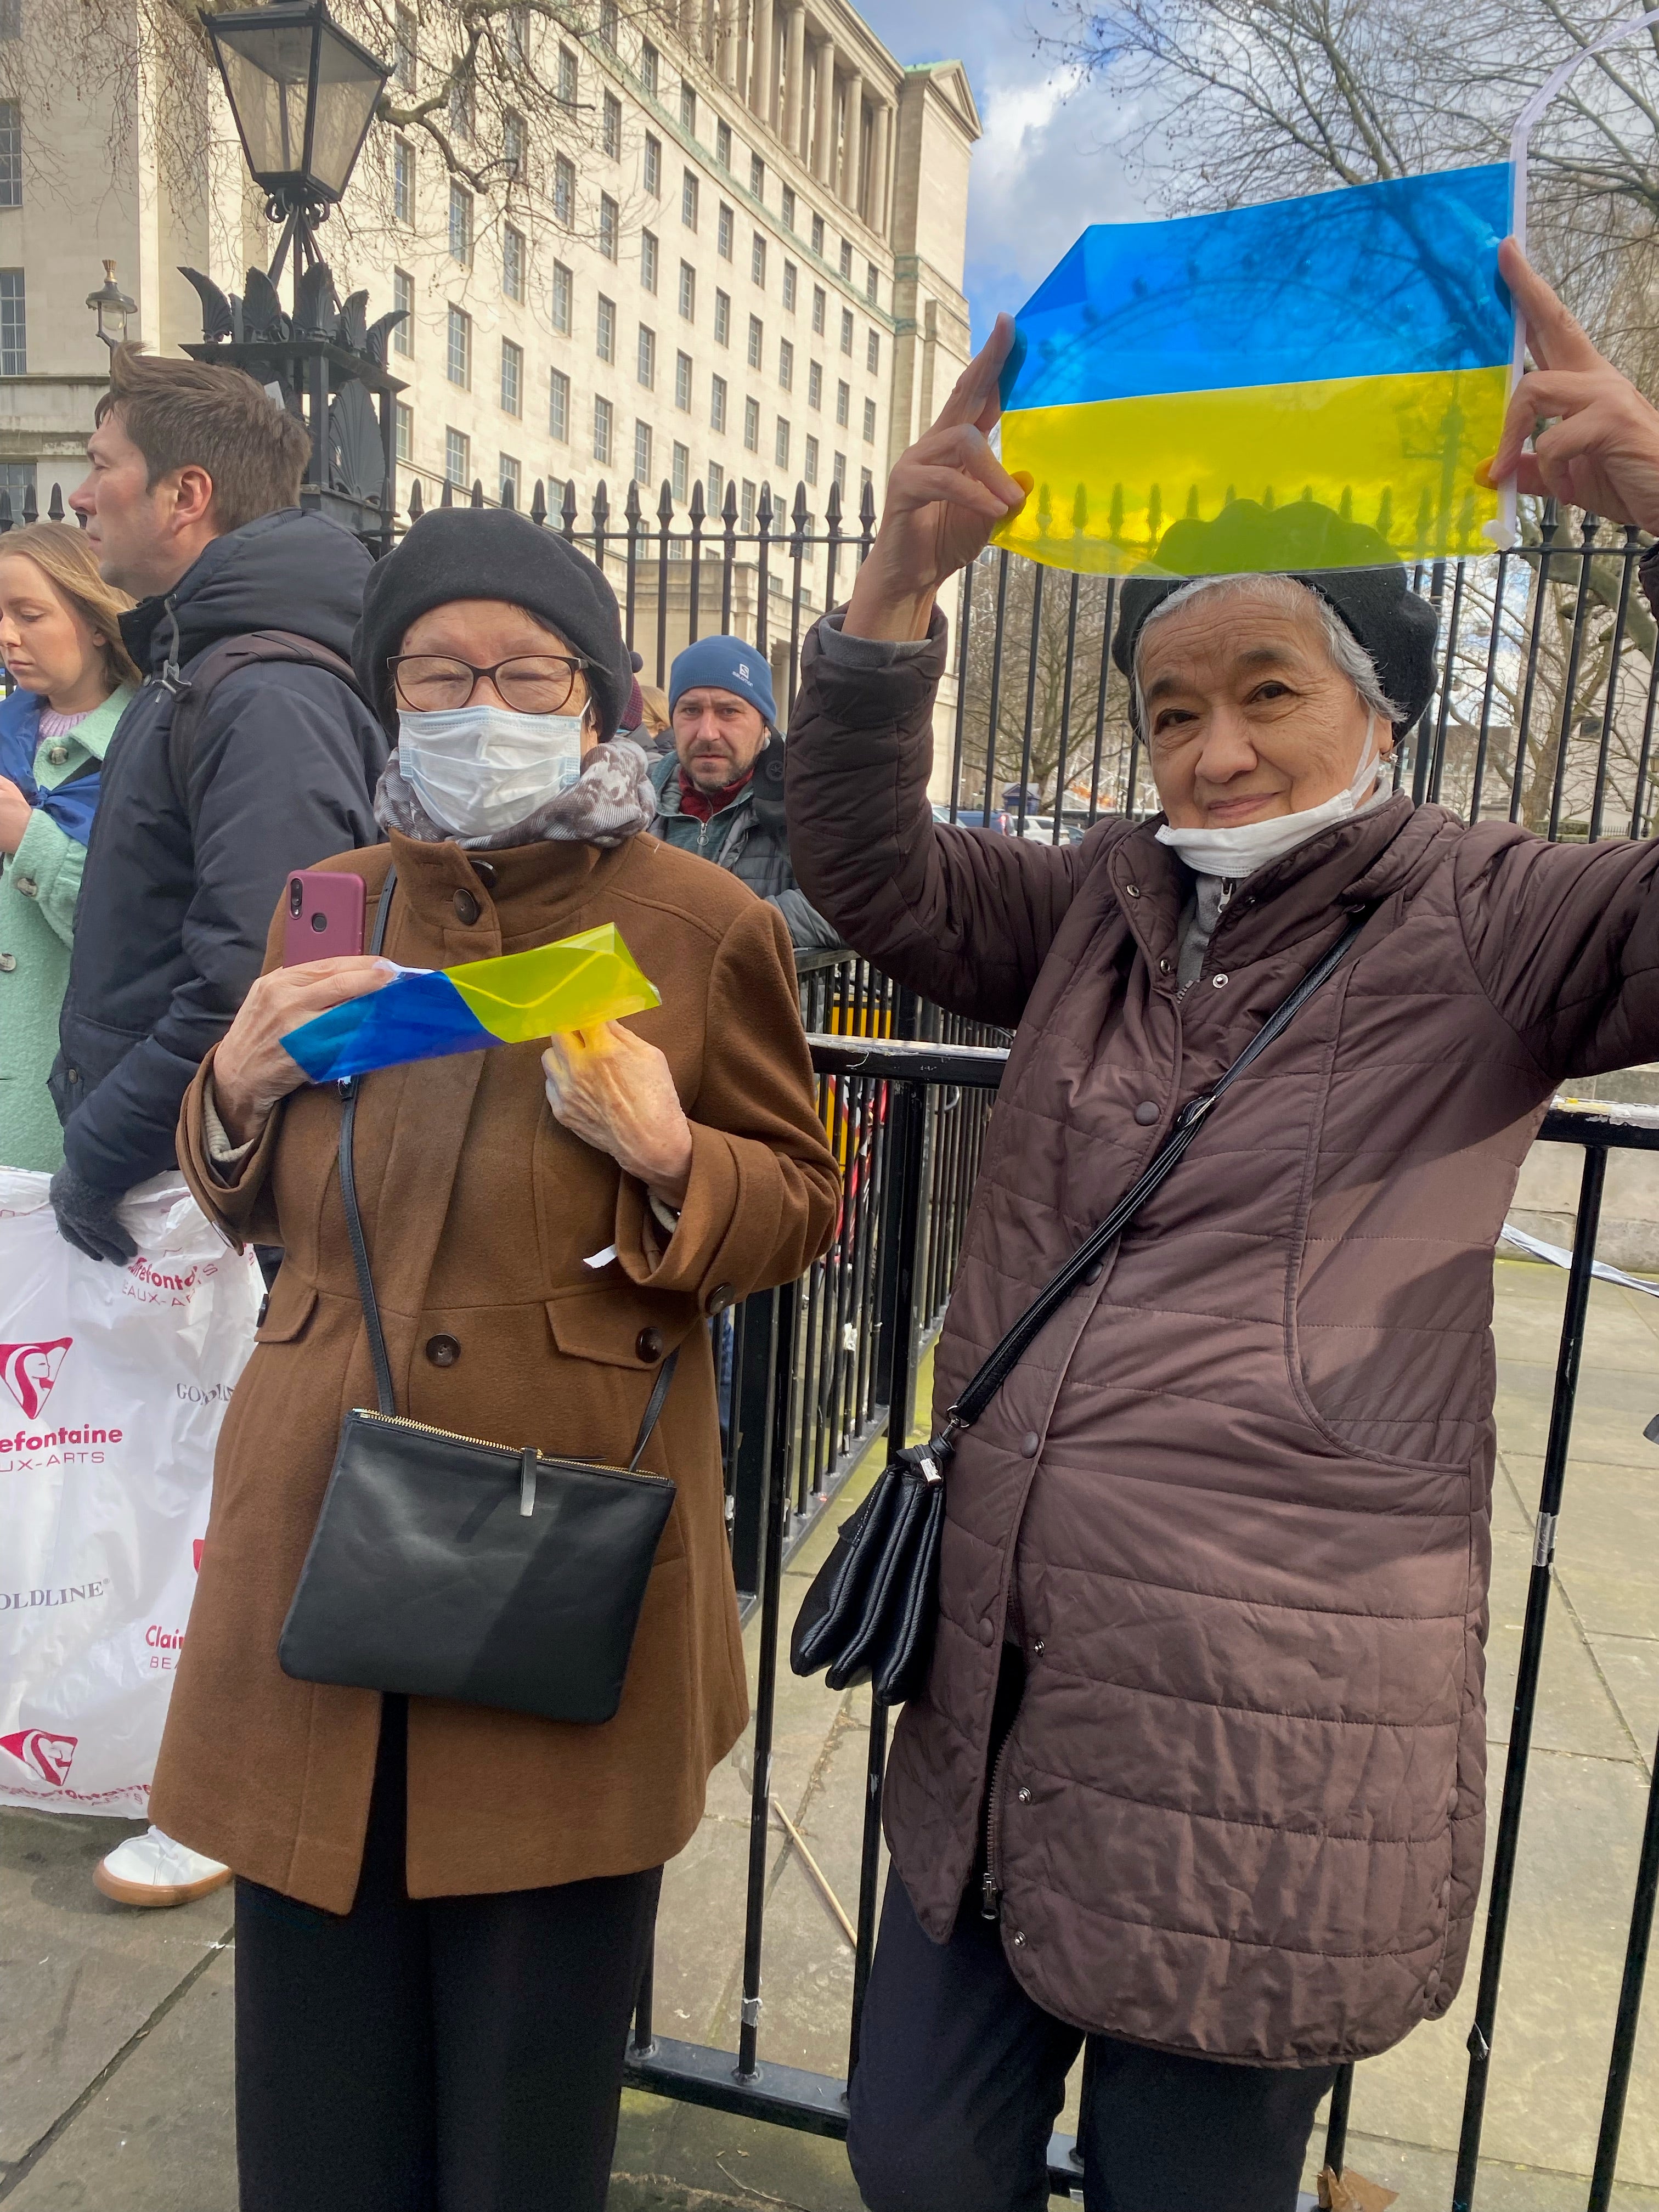 Two women from Kyrgyzstan show their solidarity for Ukraine at the Downing Street protest